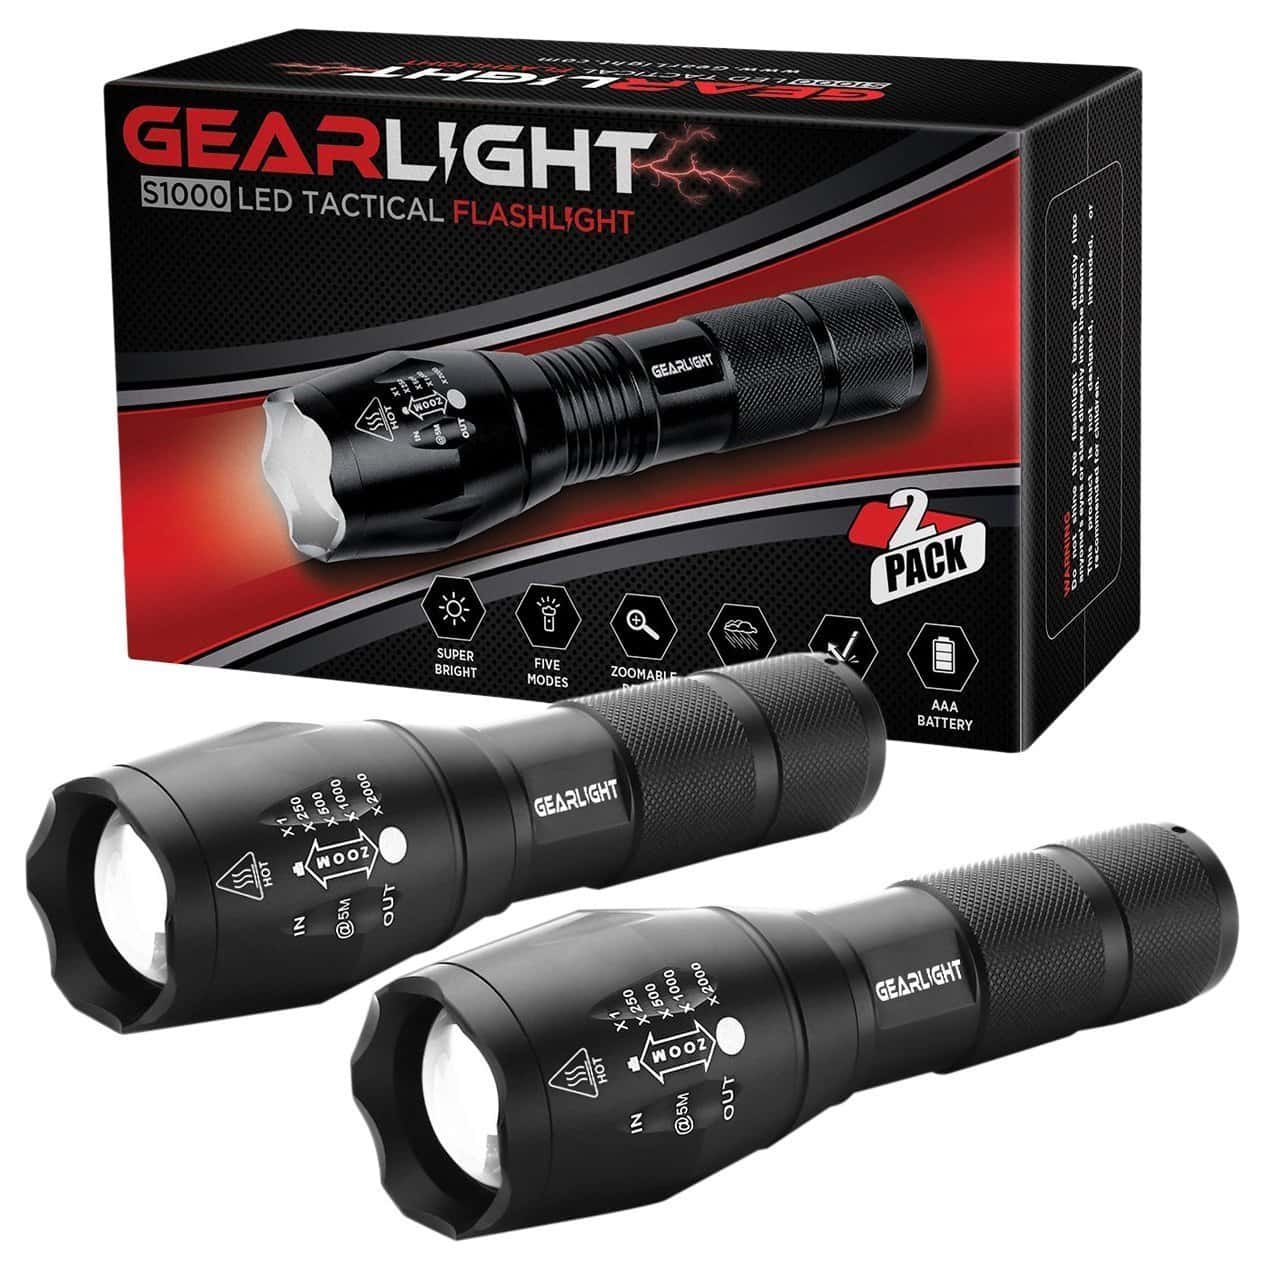 GearLight LED Tactical Flashlight S1000 [2 PACK] - High Lumen, Zoomable, 5 Modes, Water Resistant, Handheld Light